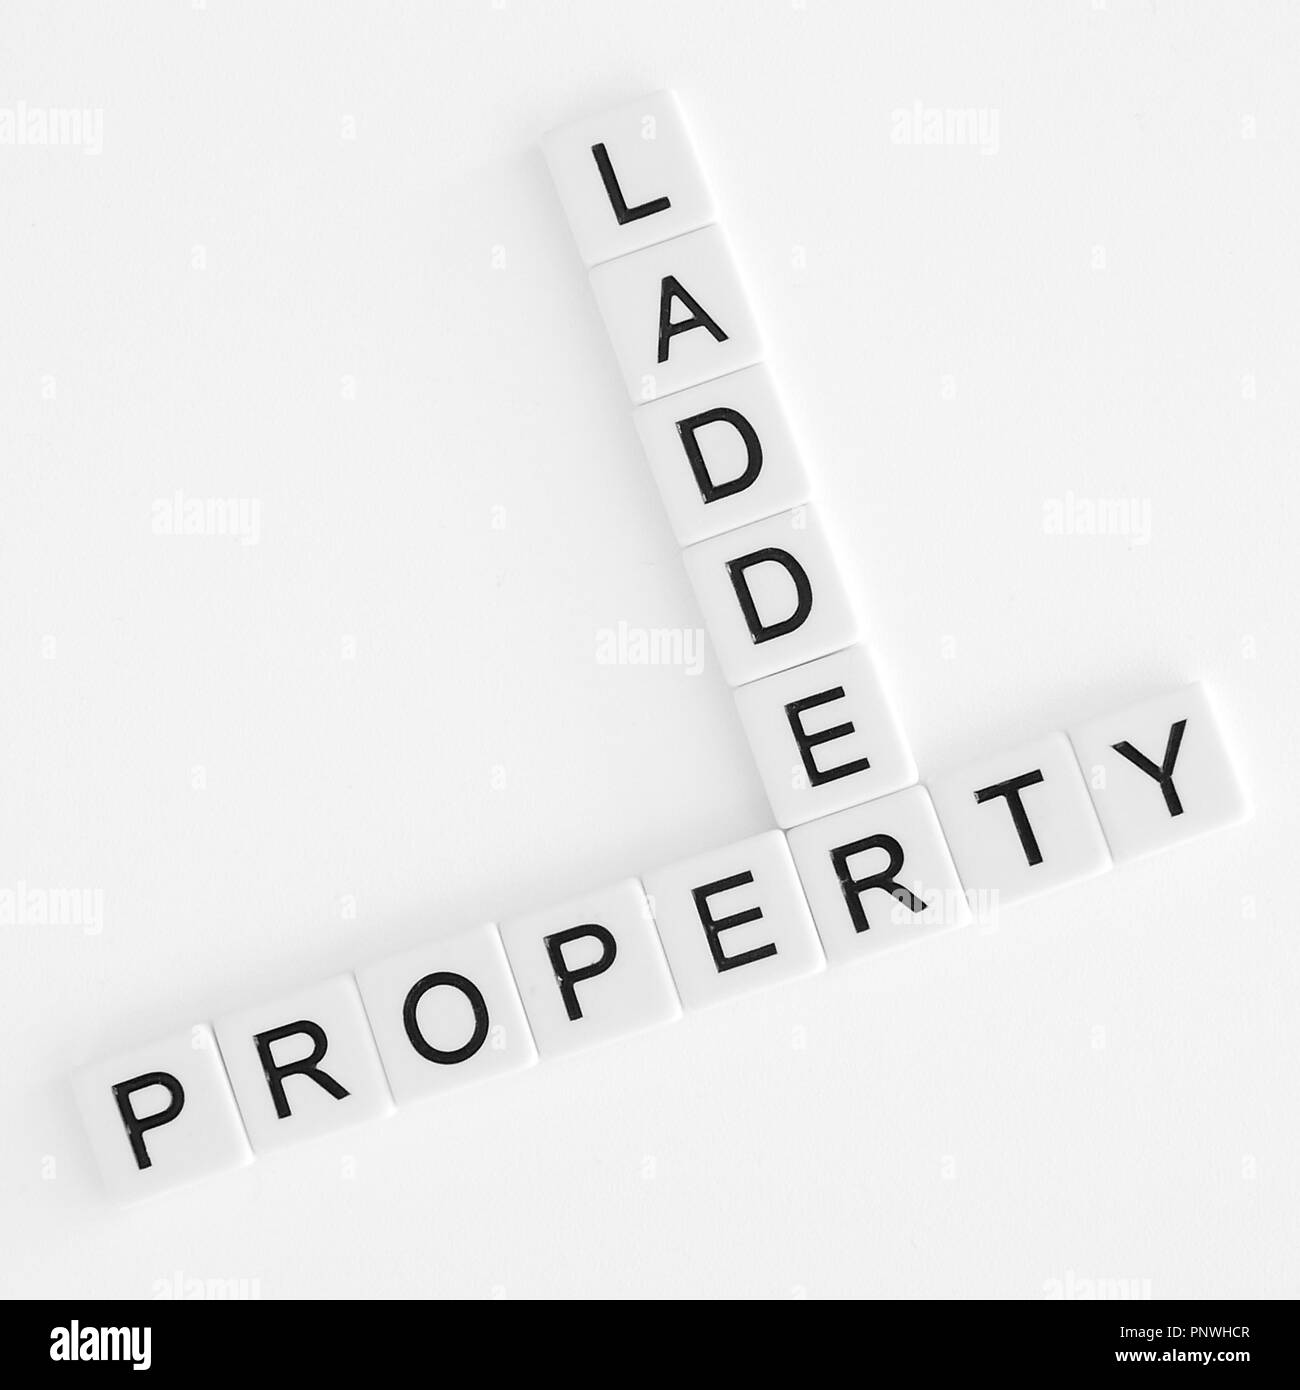 Words property and ladder in crossword style in black lettering on white tiles Stock Photo